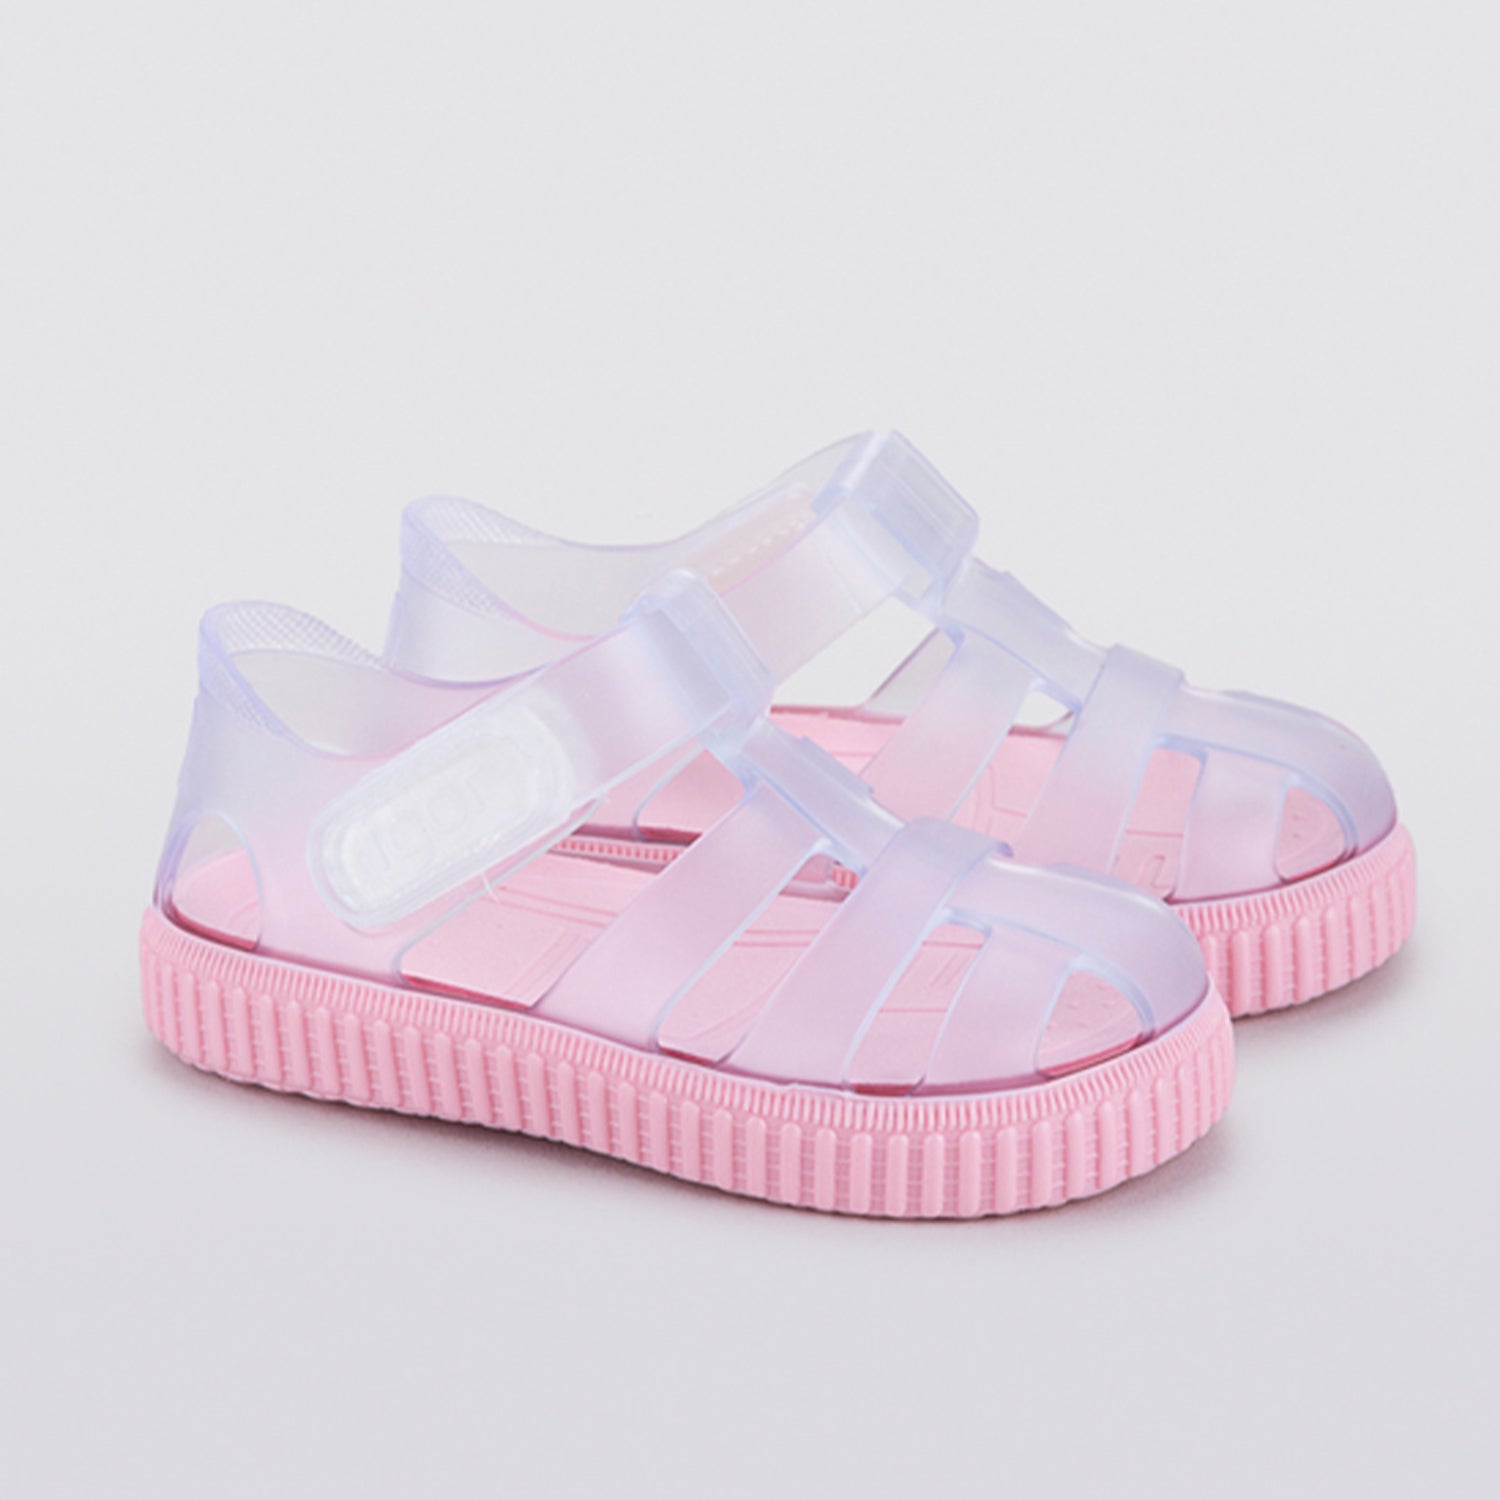 Clear Pink Bottom Jellies